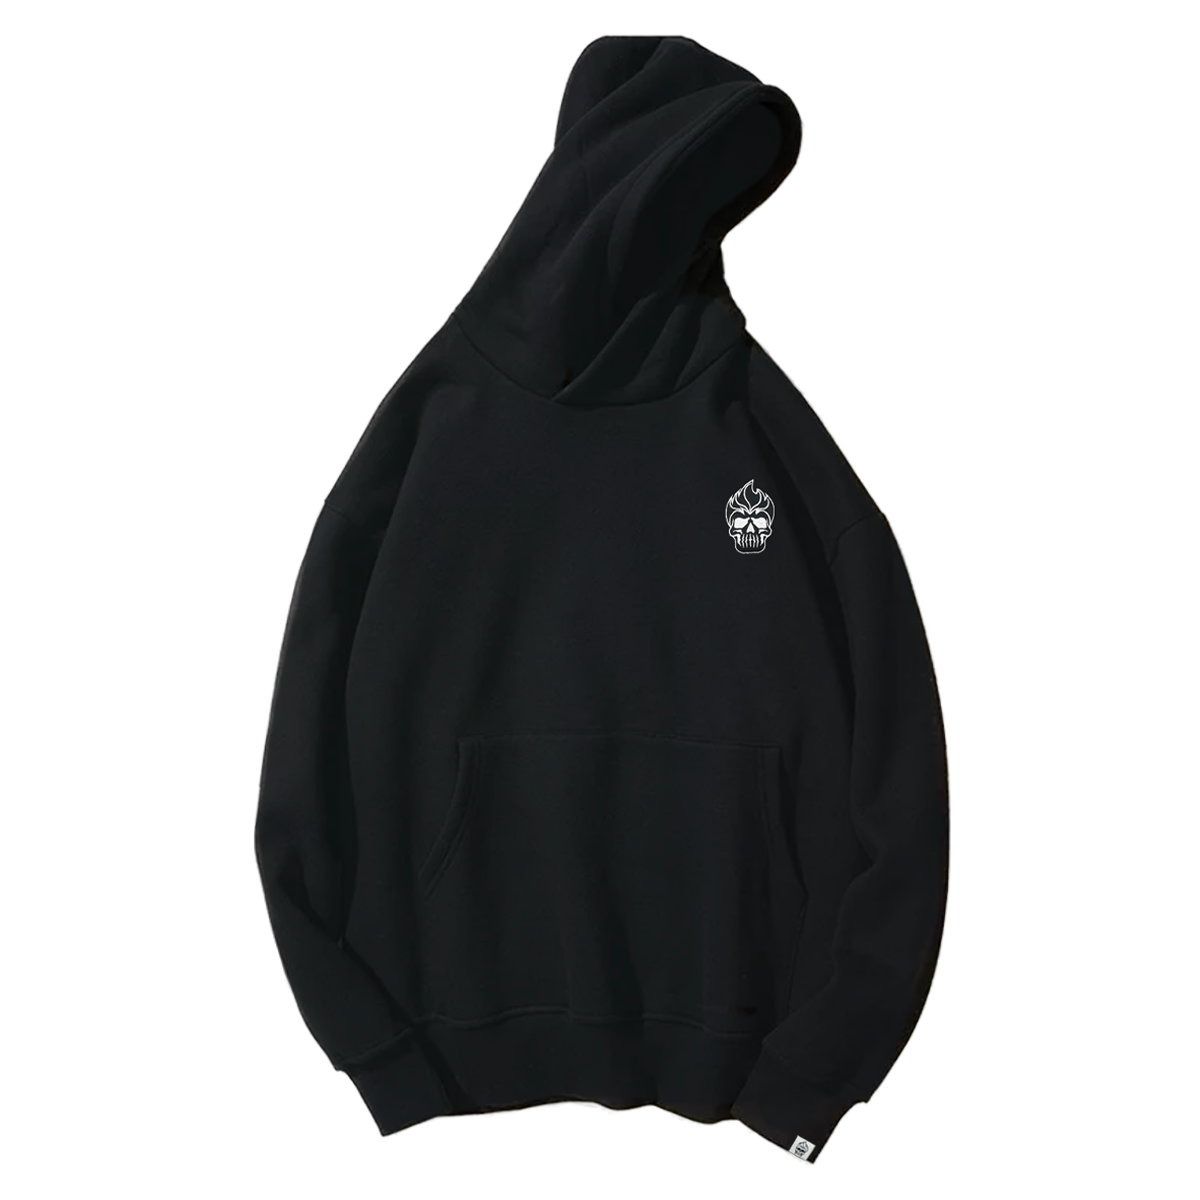 INCARNAPE SF "THE GIANT" PULL-OVER HOODIE